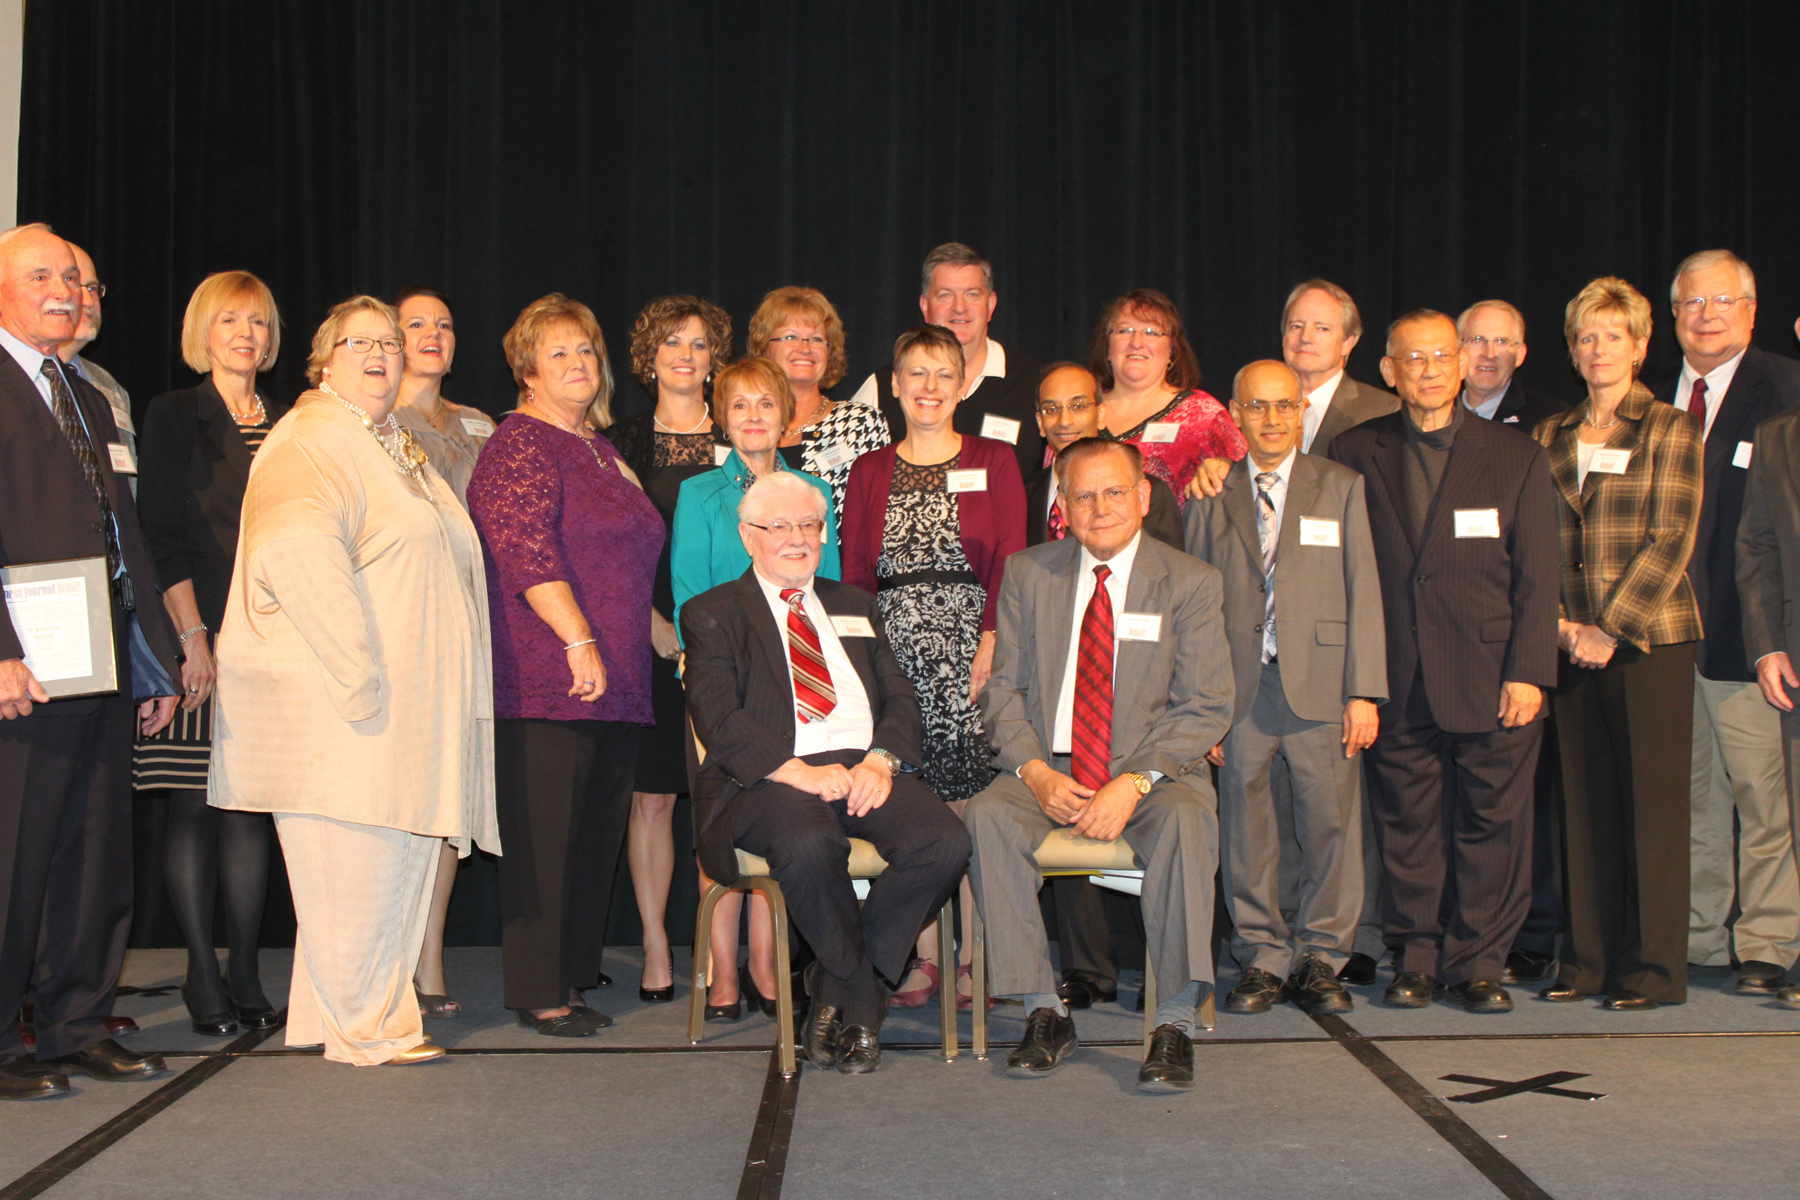 Newman Professor of Biology Surendra Singh, Ph.D., seated at right, was one of 27 individuals and organizations selected as "Health Care Heroes" by the Wichita Business Journal.